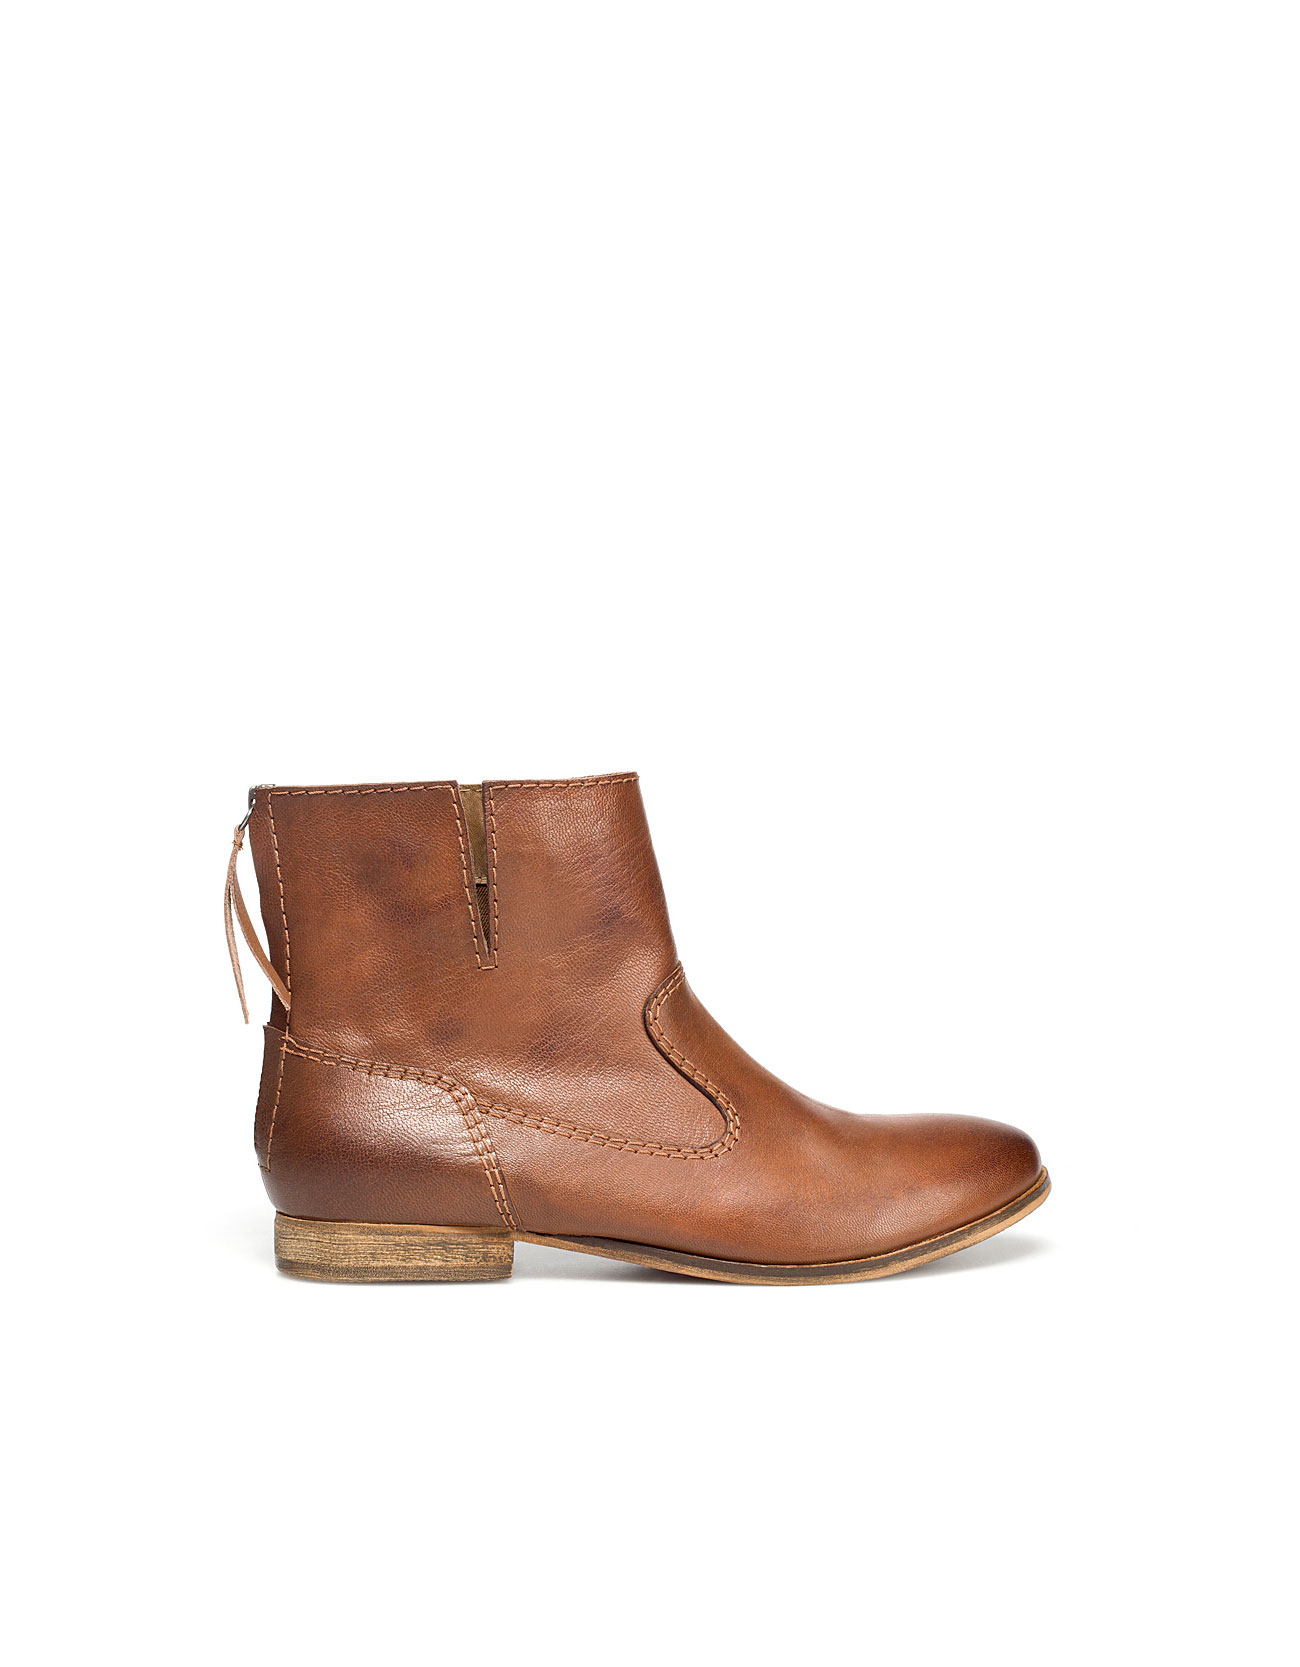 Zara Flat Ankle Boot with Zip in Brown